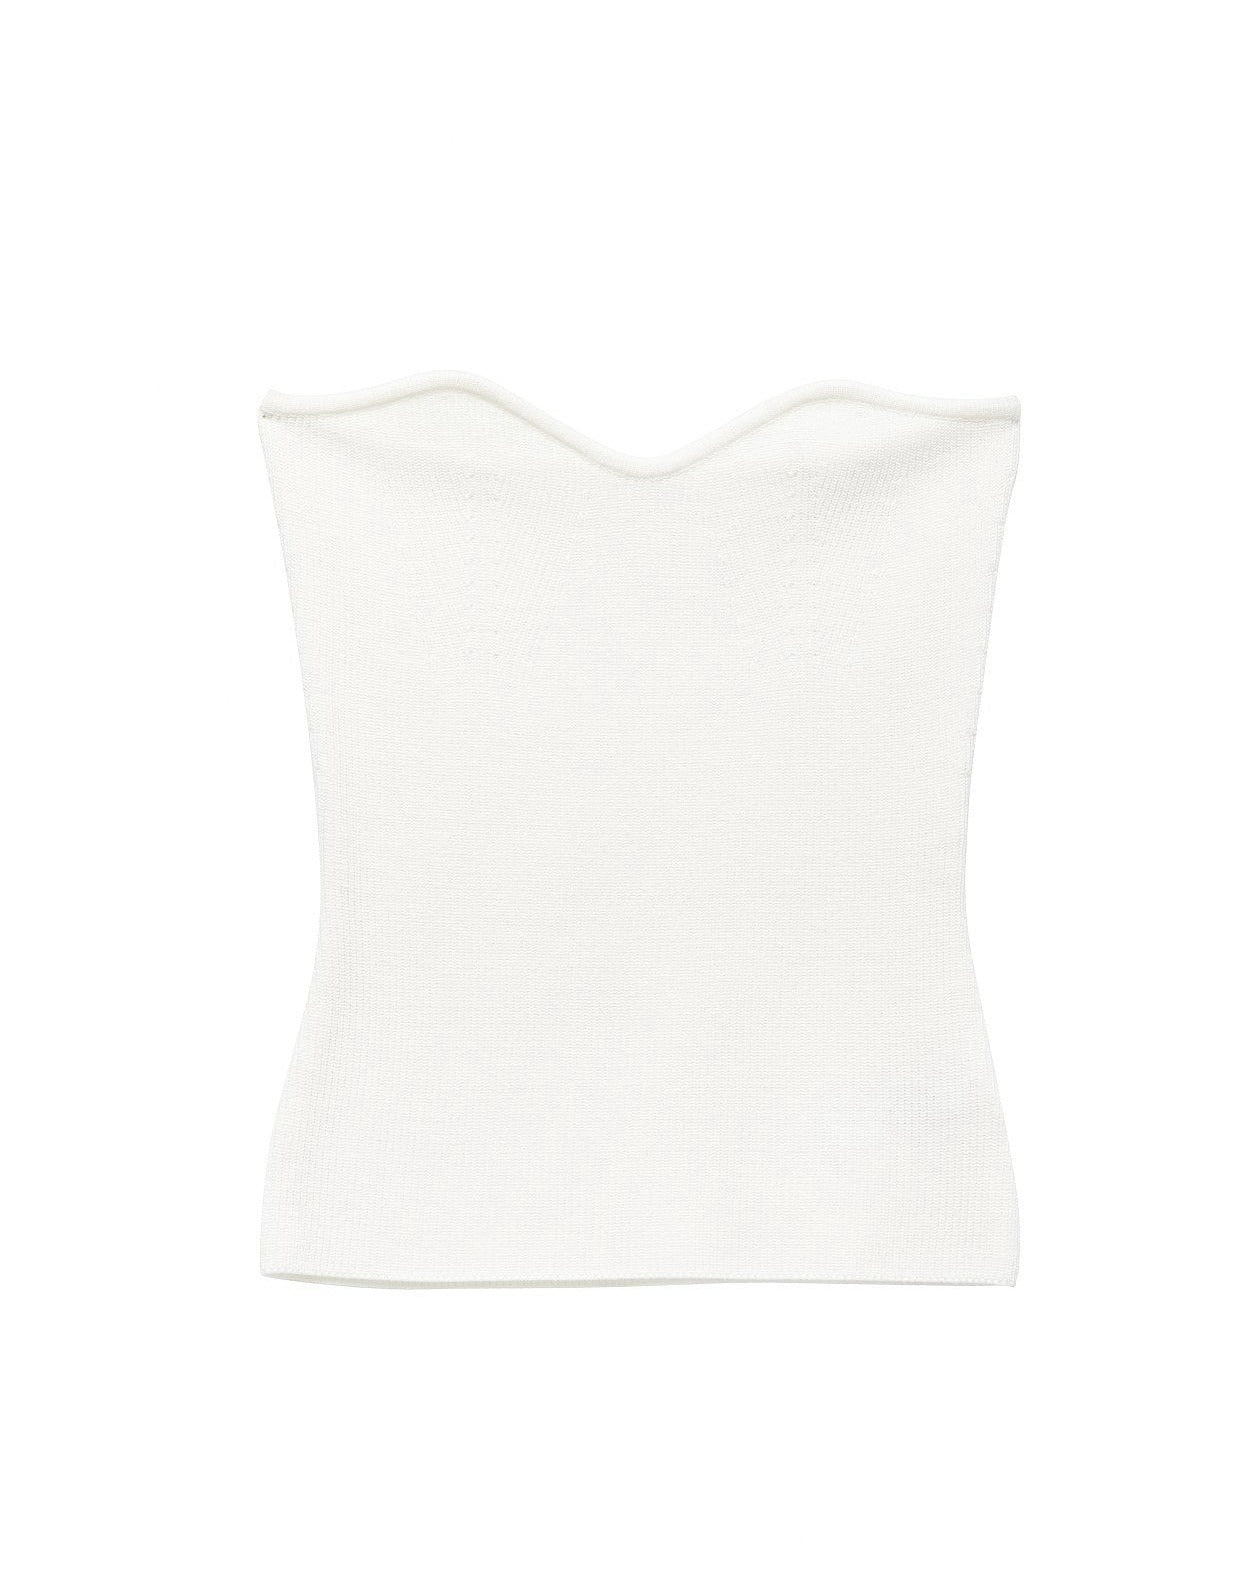 【PAPERMOON ペーパームーン】SS / Volume Bust Tube Knit Top